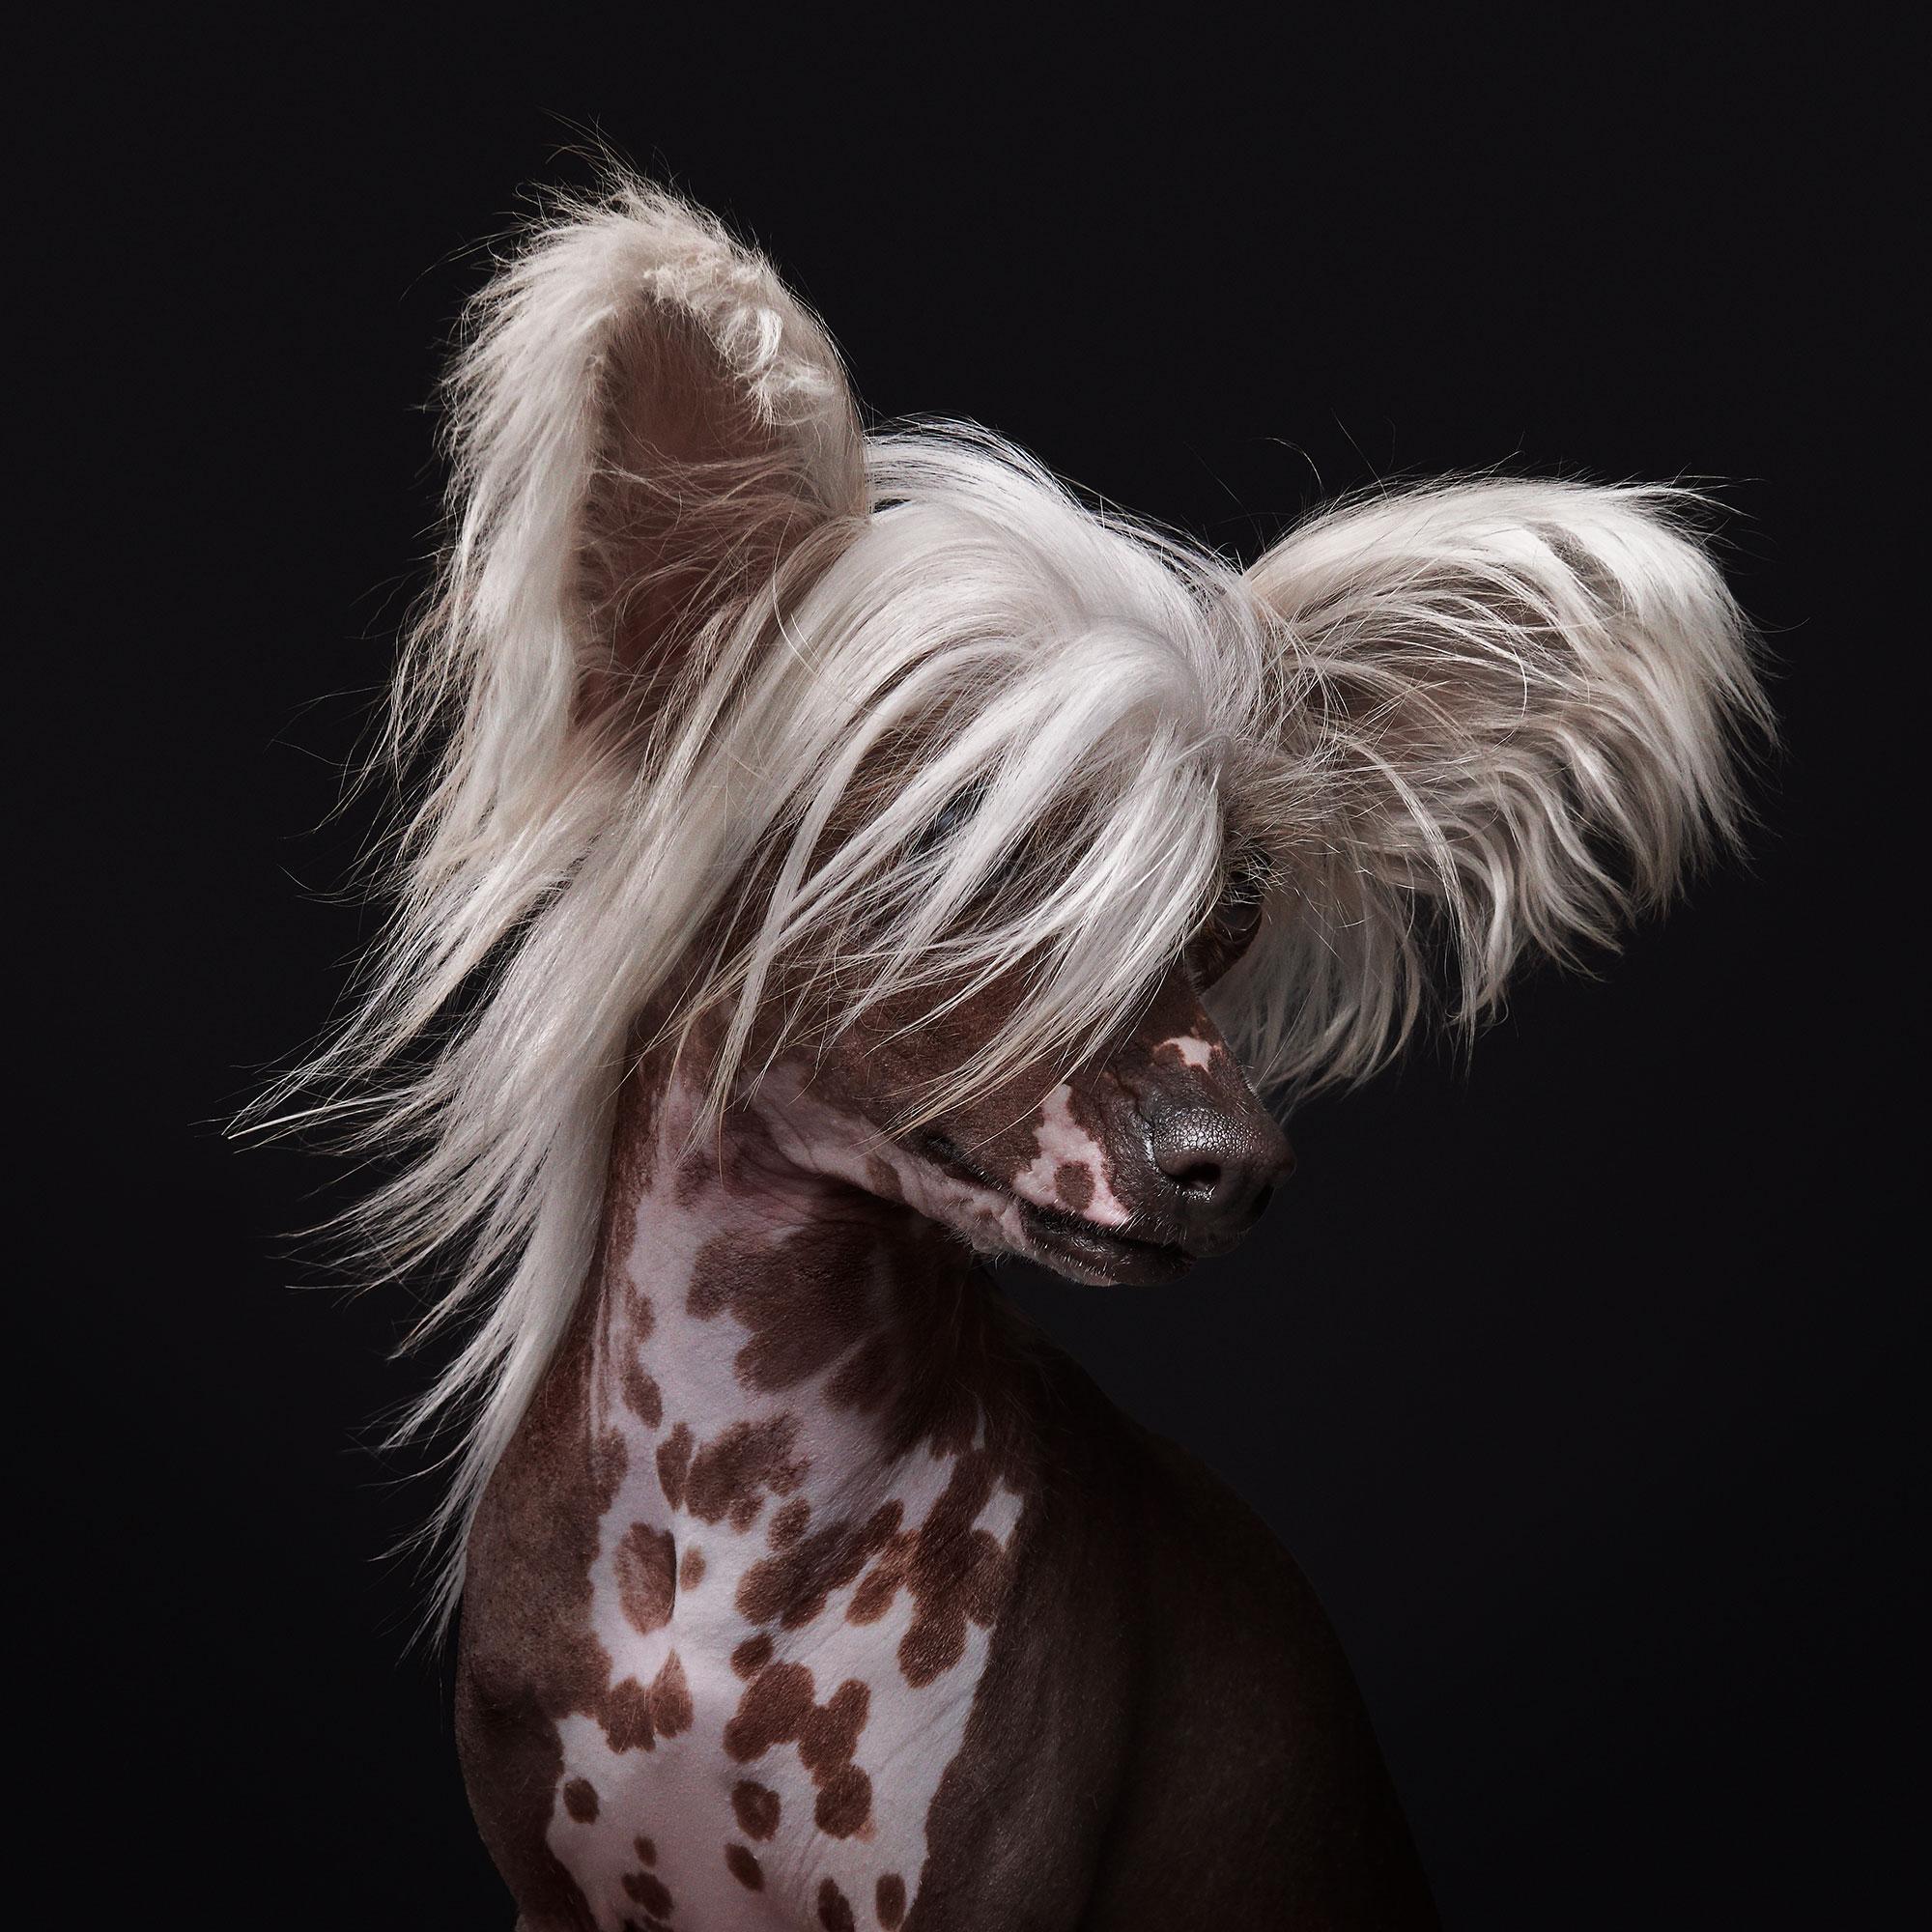 All available sizes and editions:
32 x 32, edition of 15
40 x 40, edition of 10
48 x 48, edition of 5

Narrative:
This pup was, truly, his own spotlight and had no hesitations when it came time to strike a pose. Chinese Crested dogs can not be